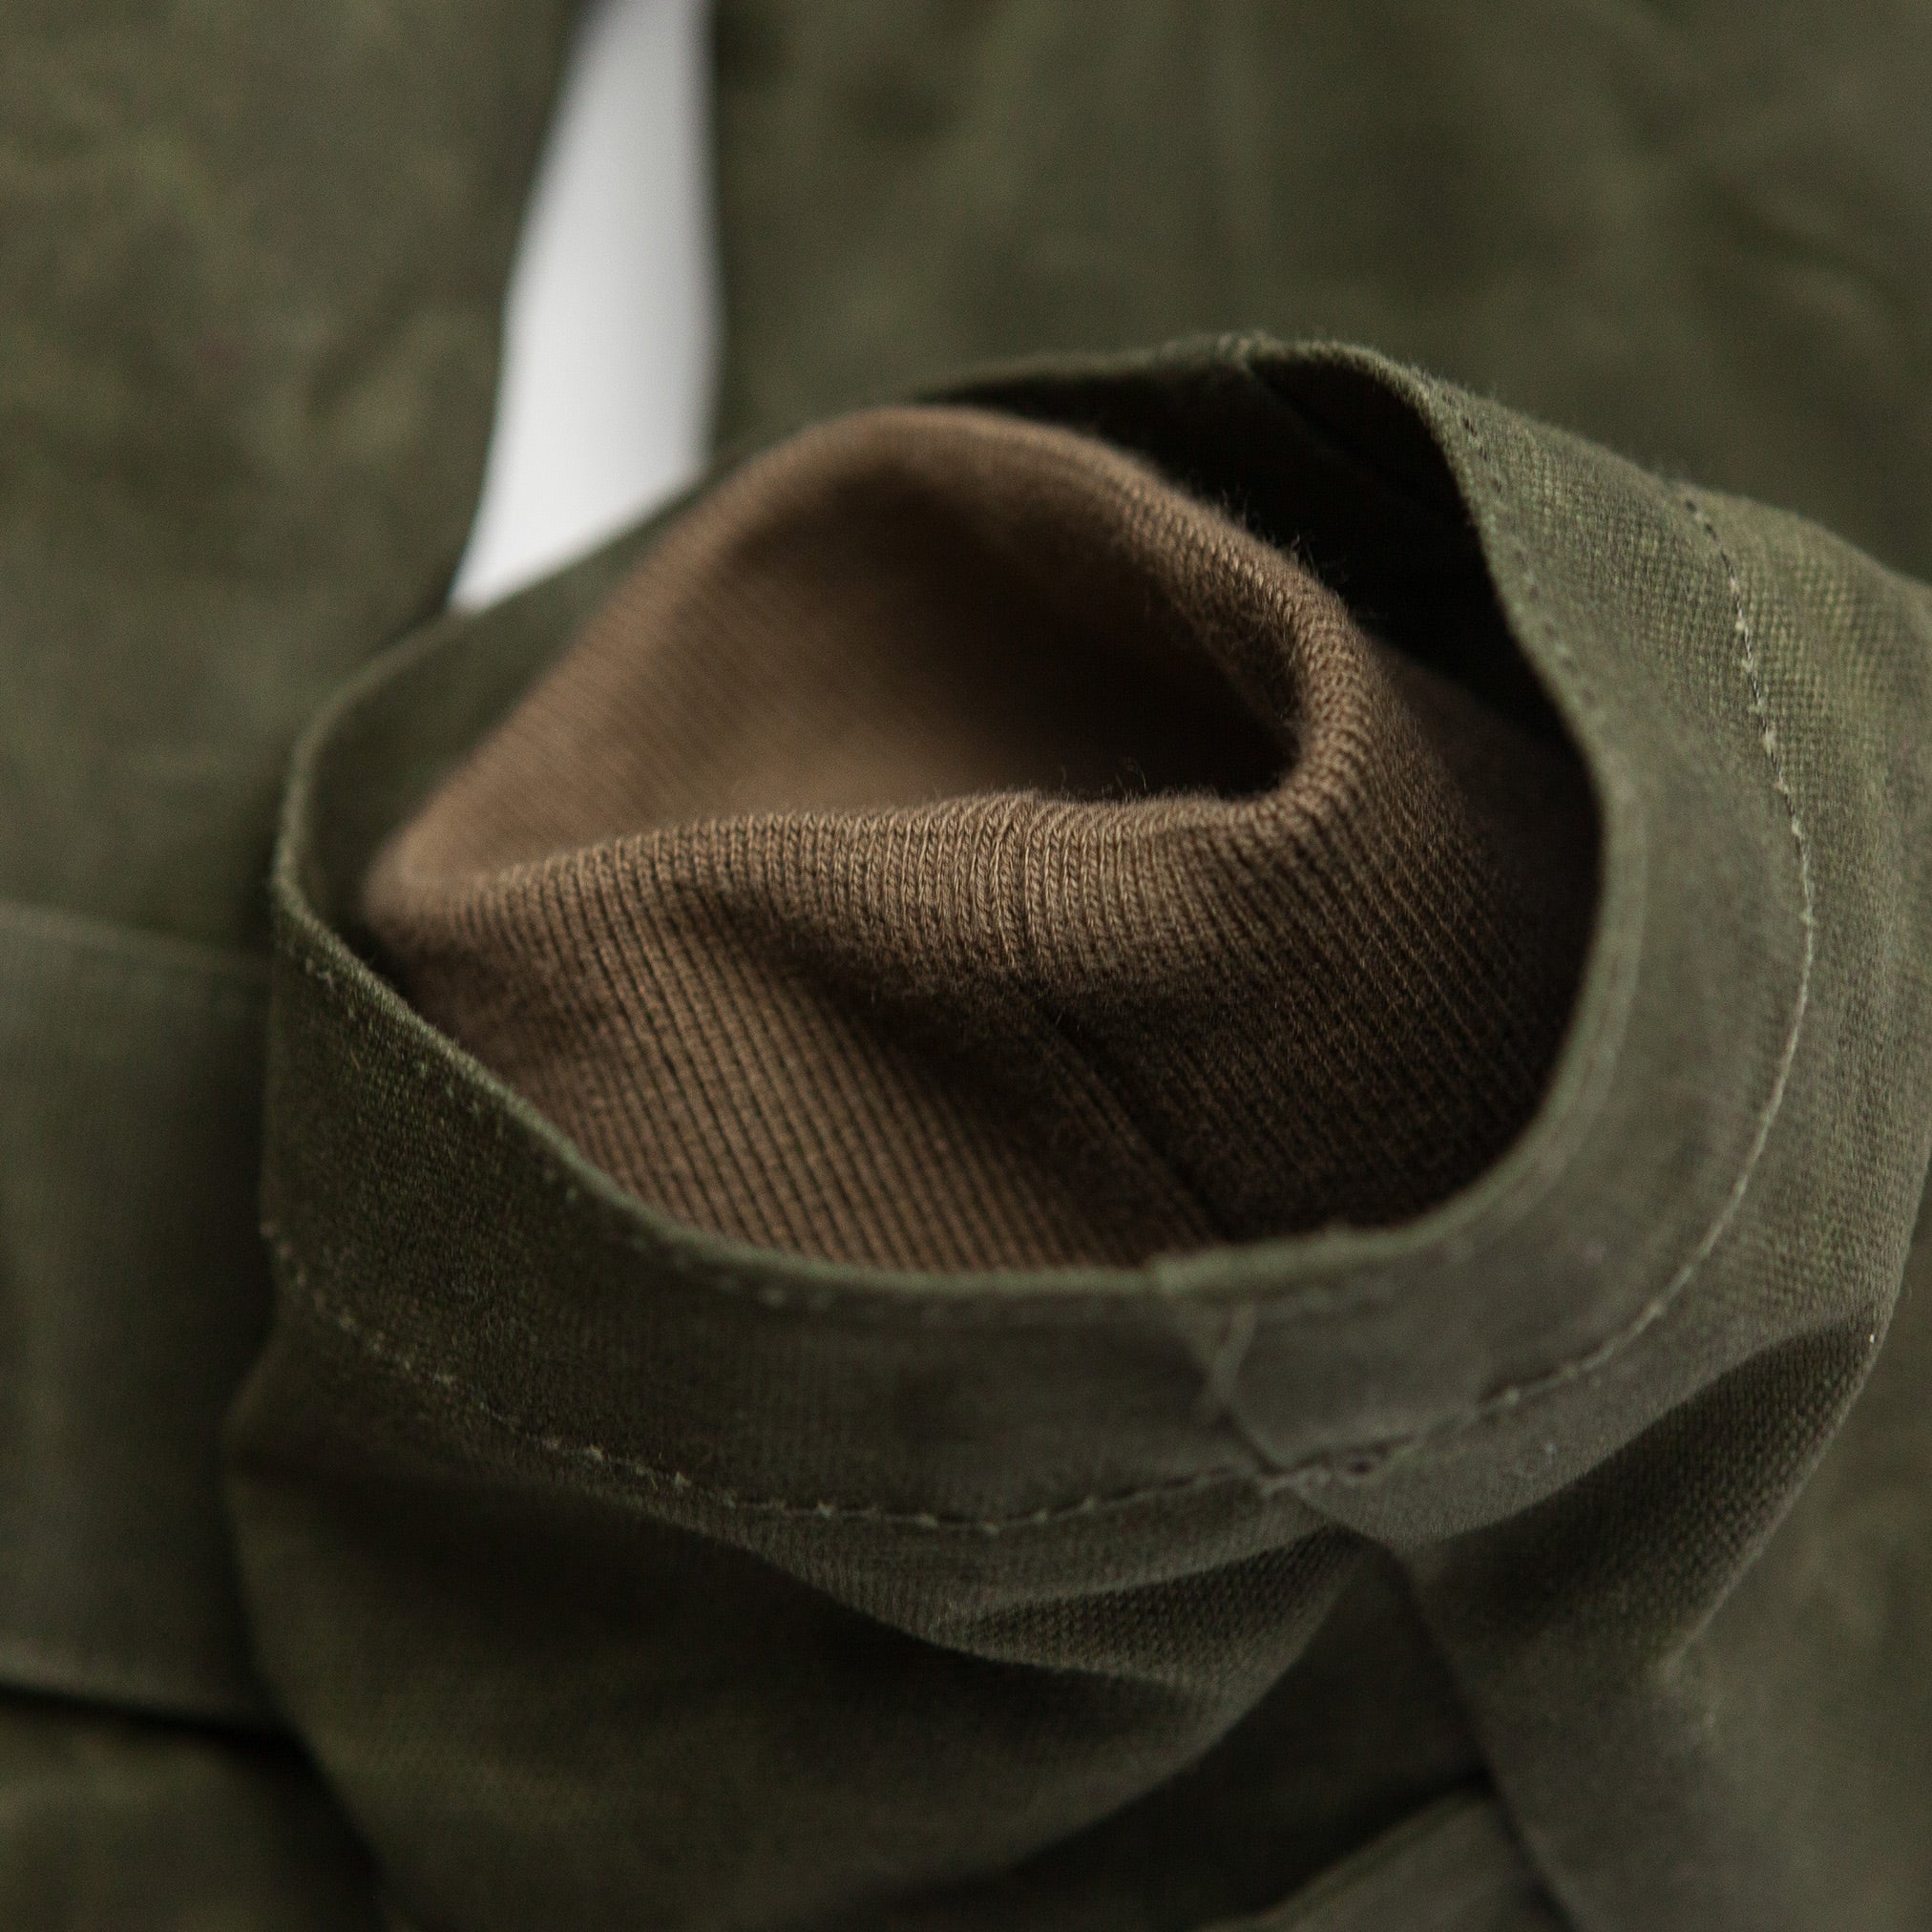 Lined Waxed Parka in Olive